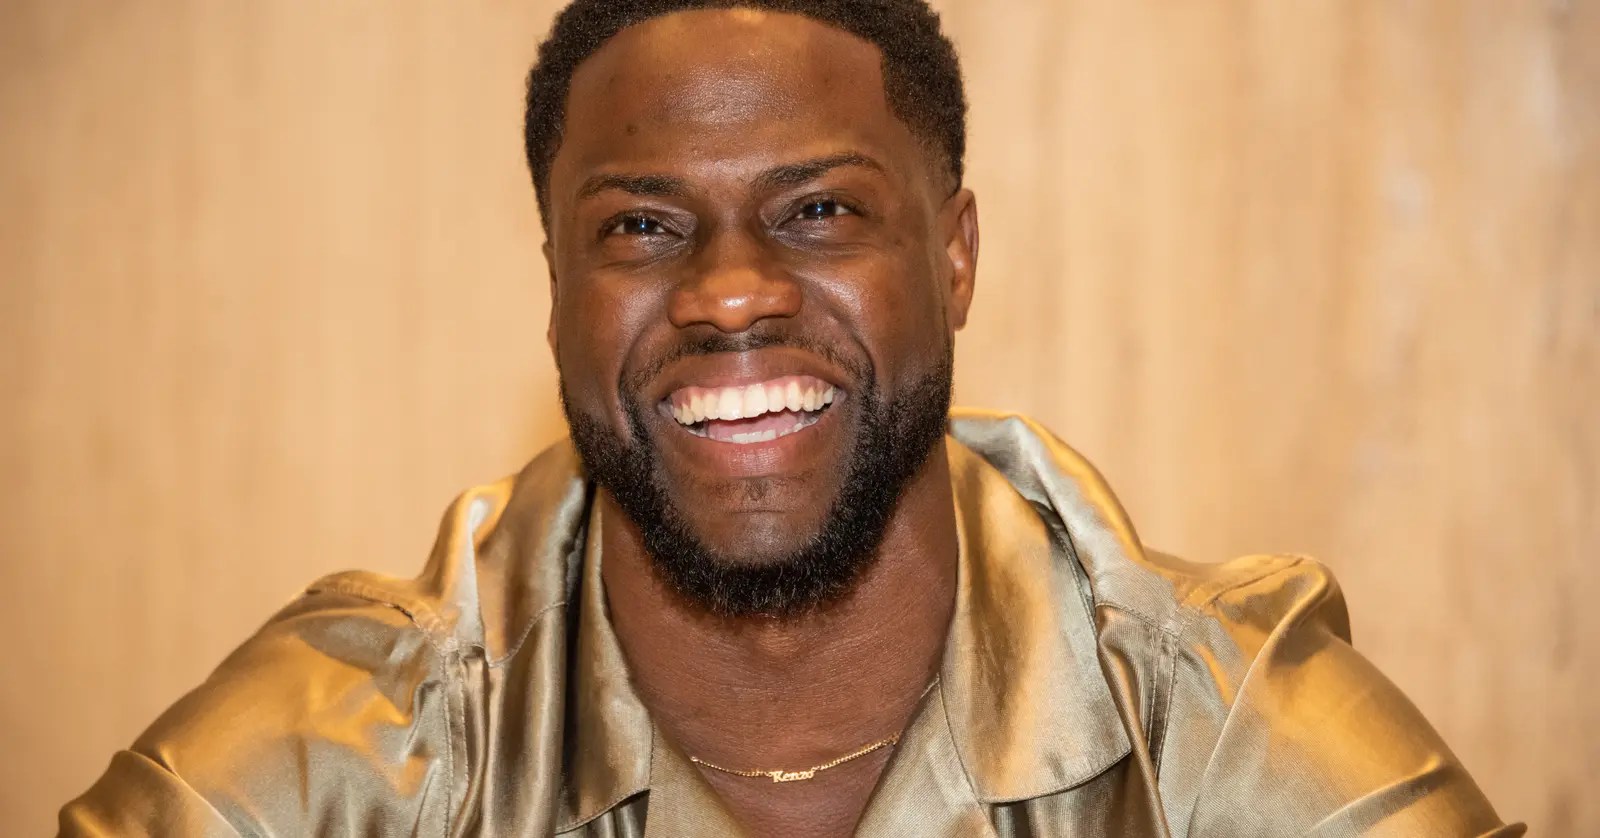 What Happened to Kevin Hart's Mom? Netflix Documentary Explores His Family